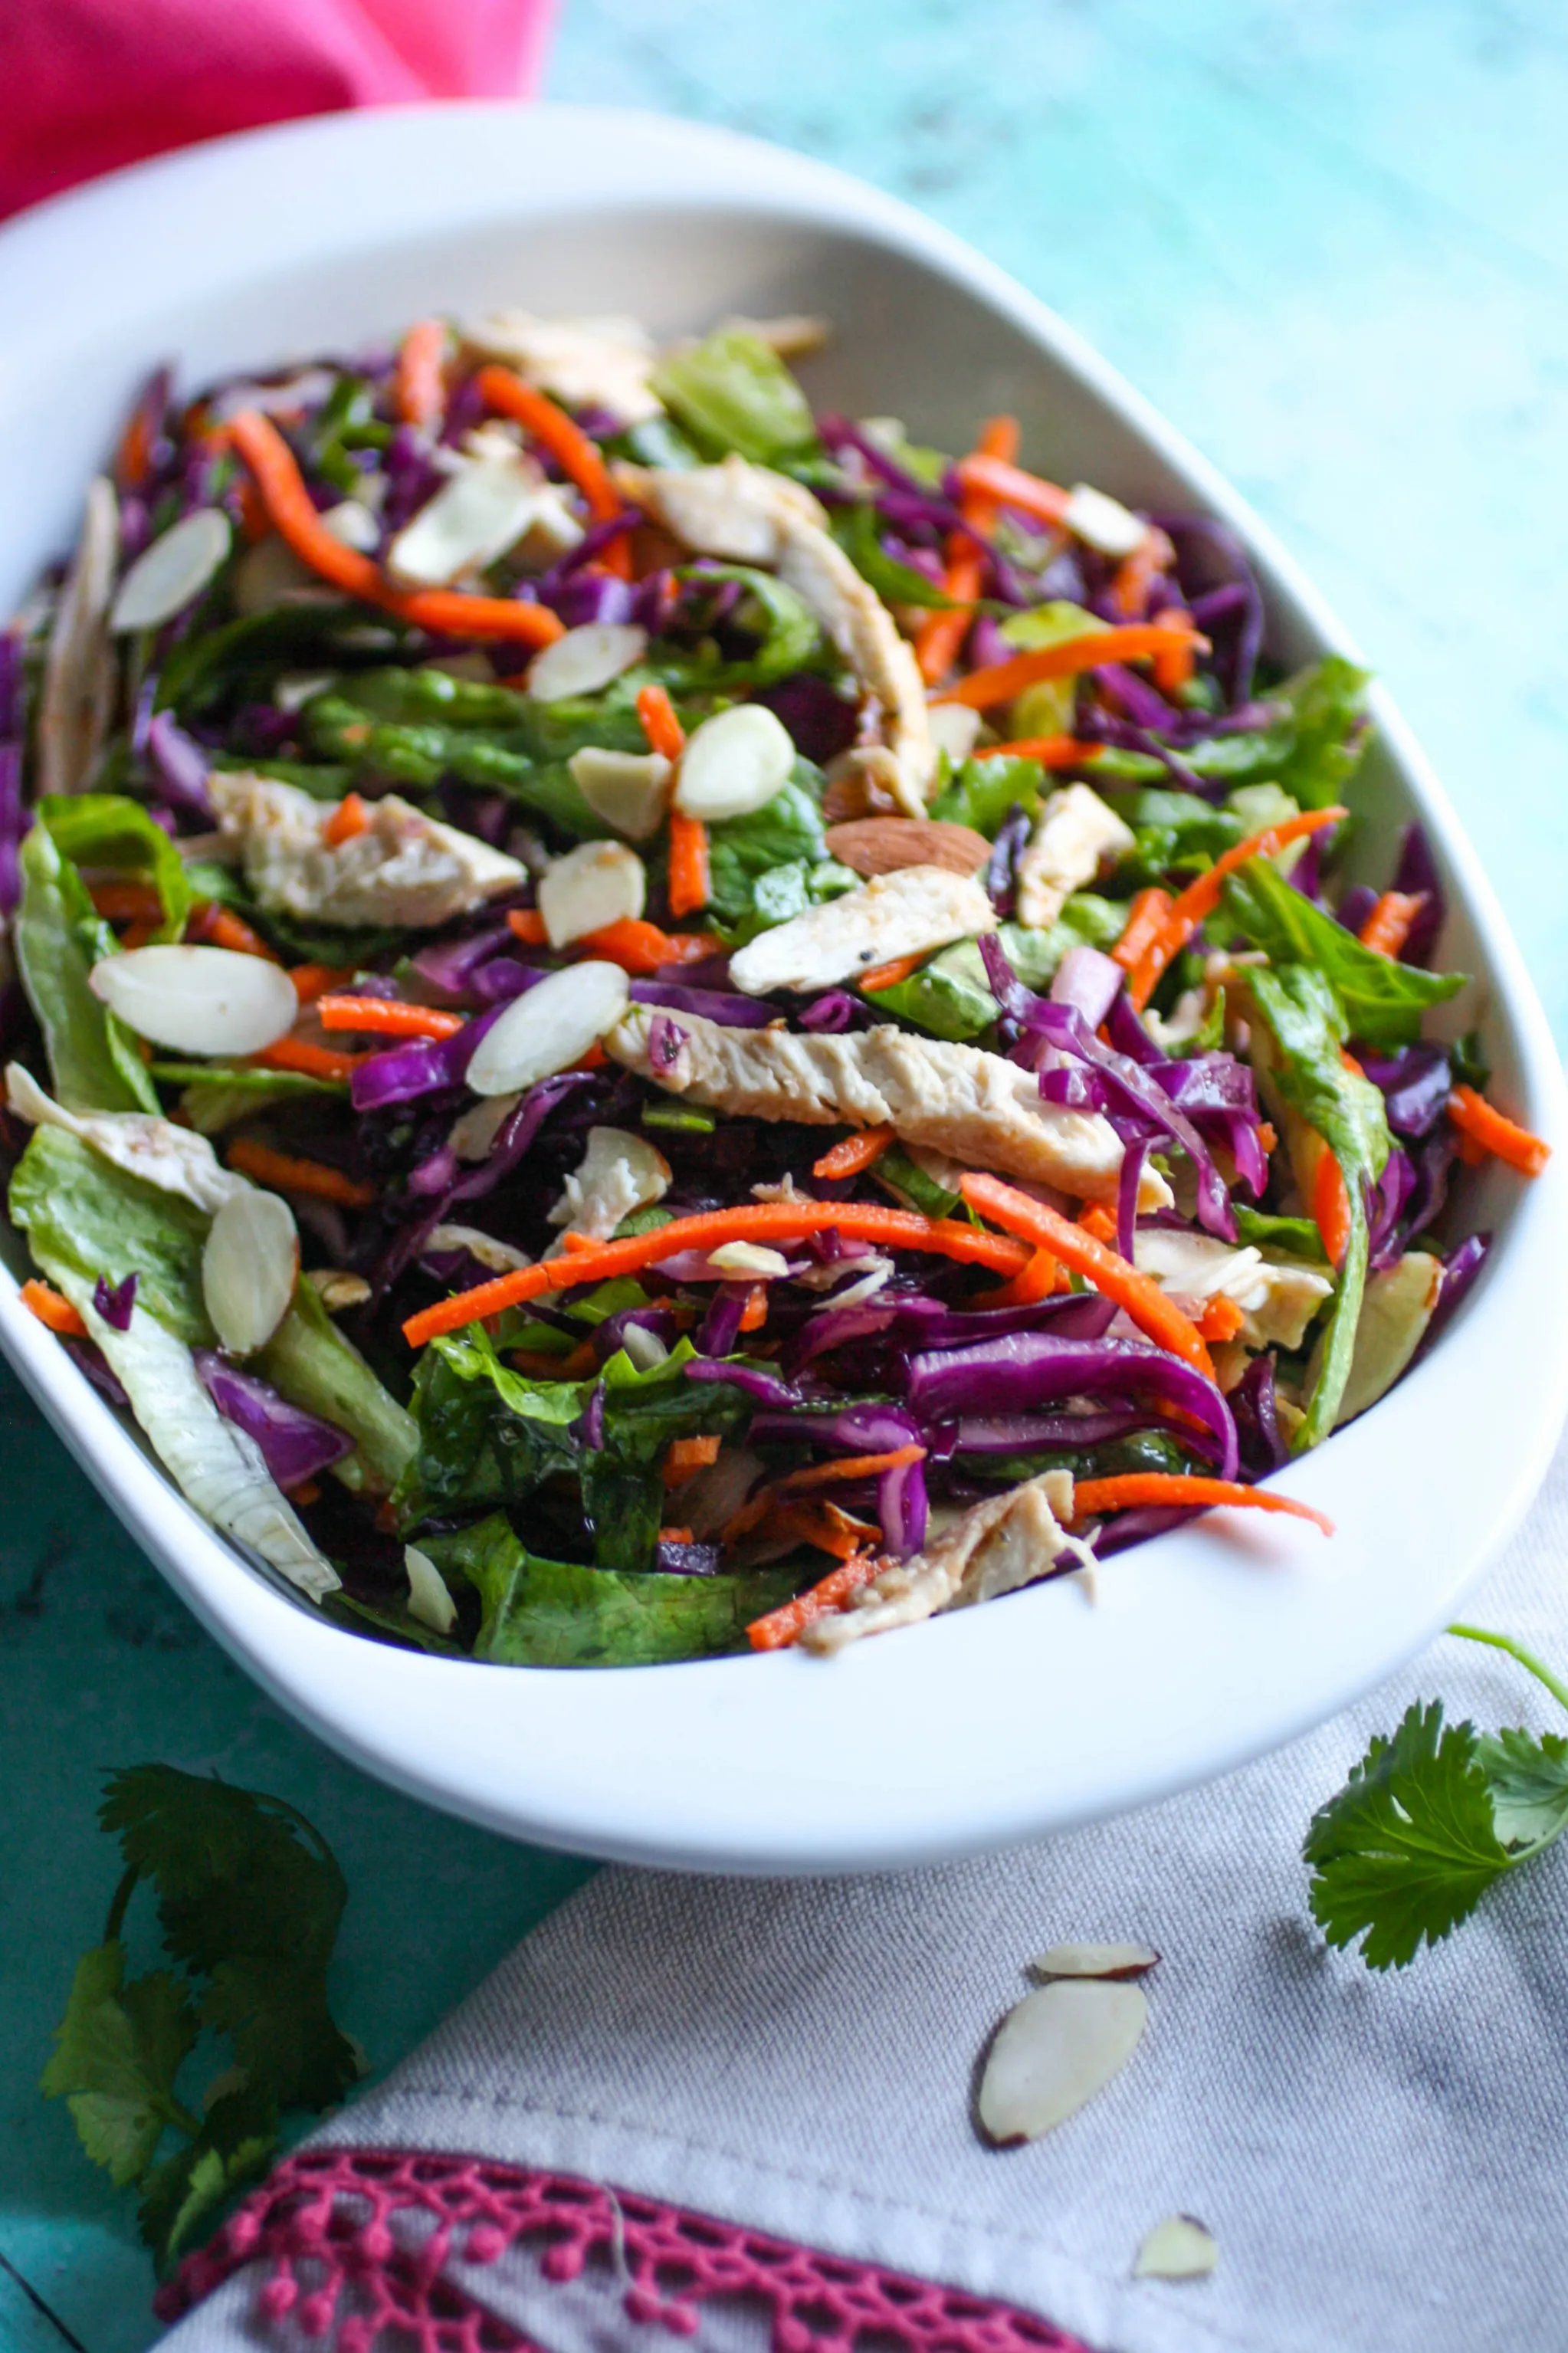 Crunchy Cabbage & Chicken Salad with Sesame Dressing is a lovely salad to serve with any meal. You'll love the crunch and color in this vibrant cabbage salad.